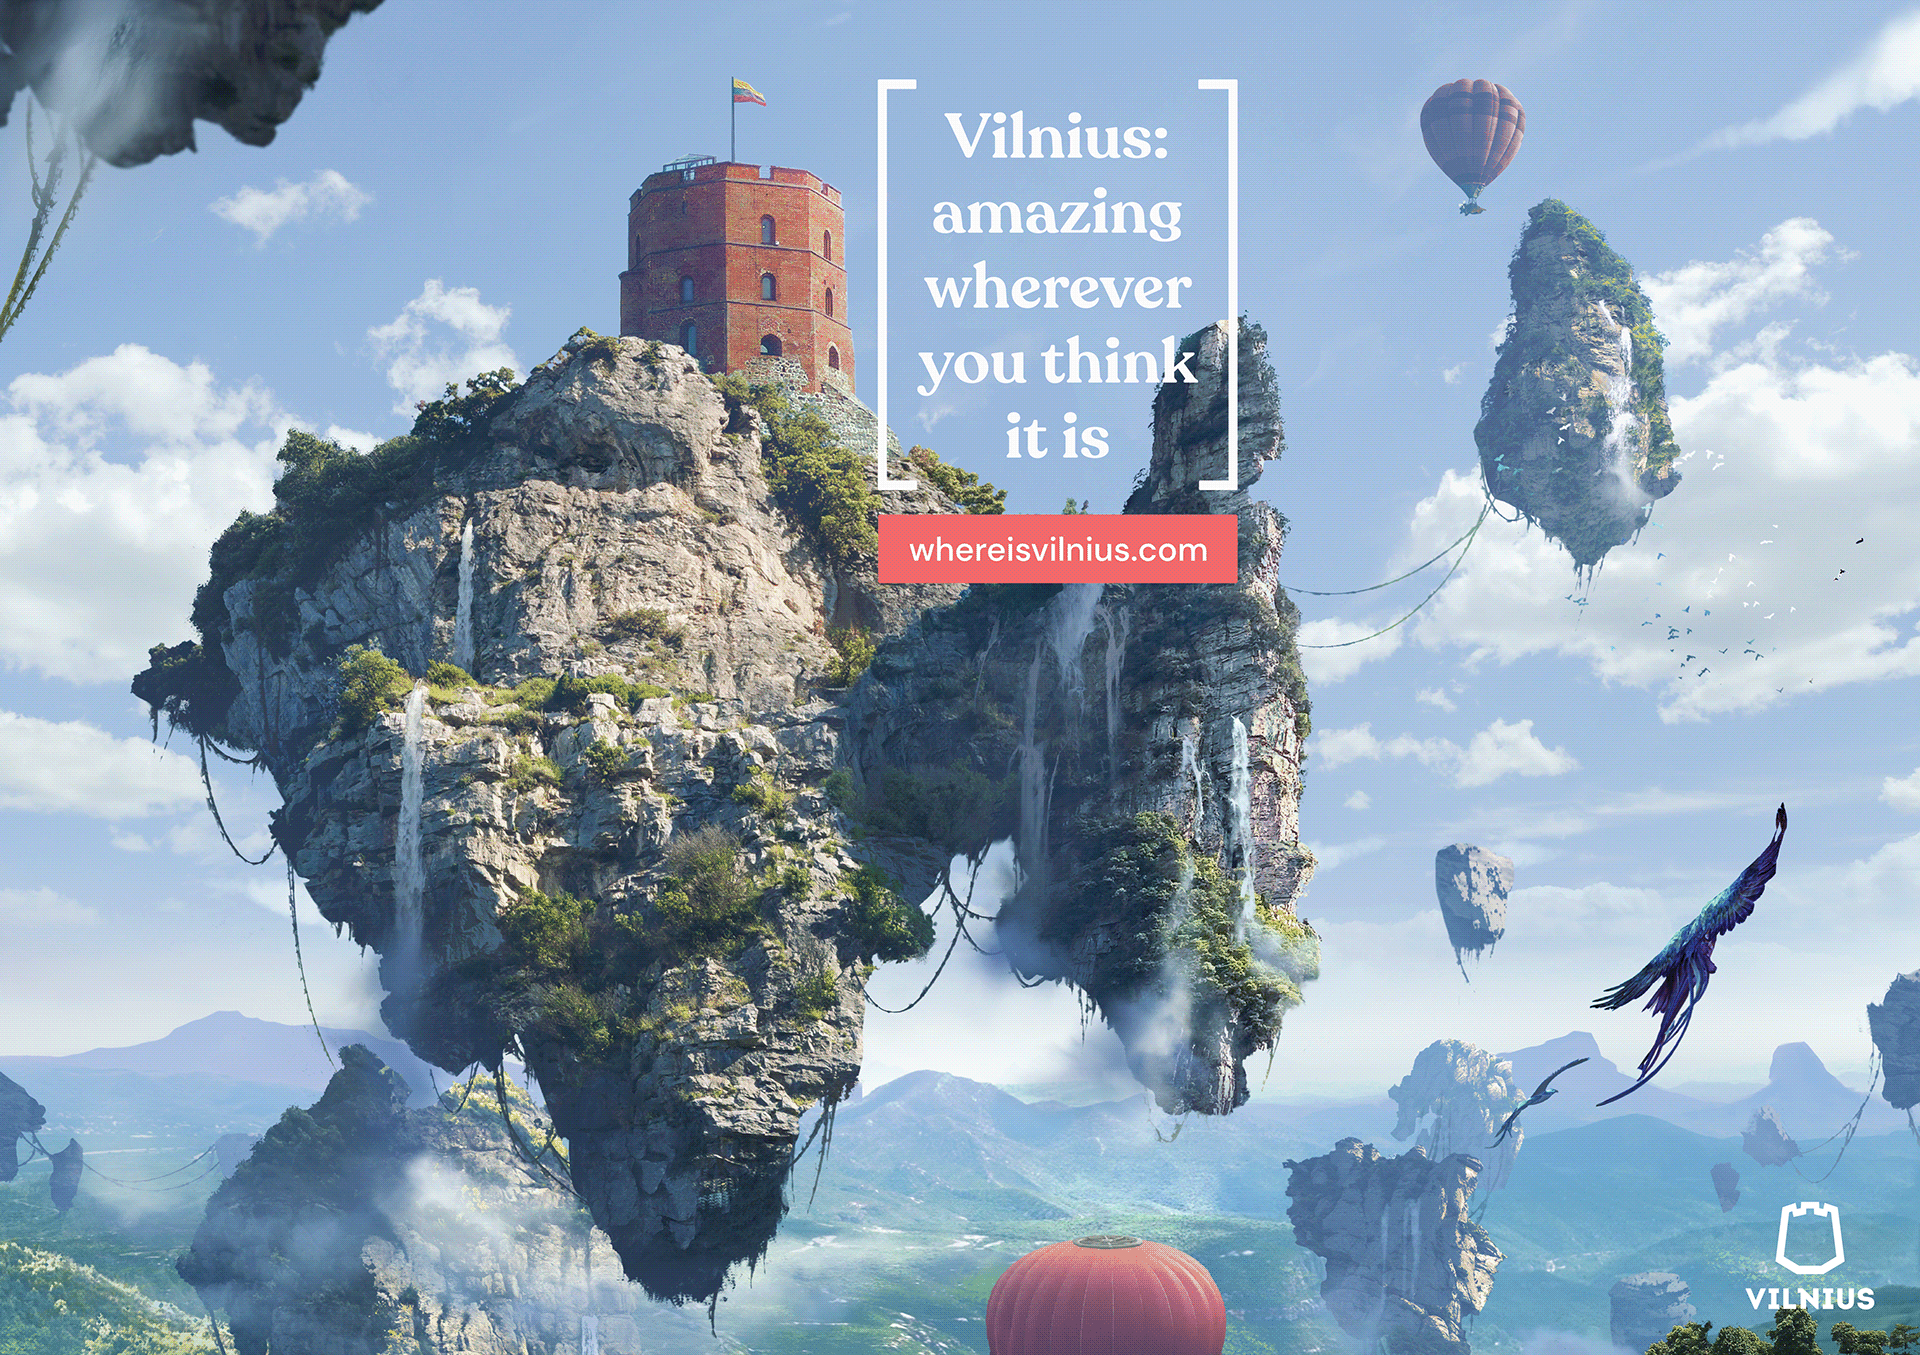 Vilnius is painted as a city atop a floating rock in a fantasy tourism campaign poster